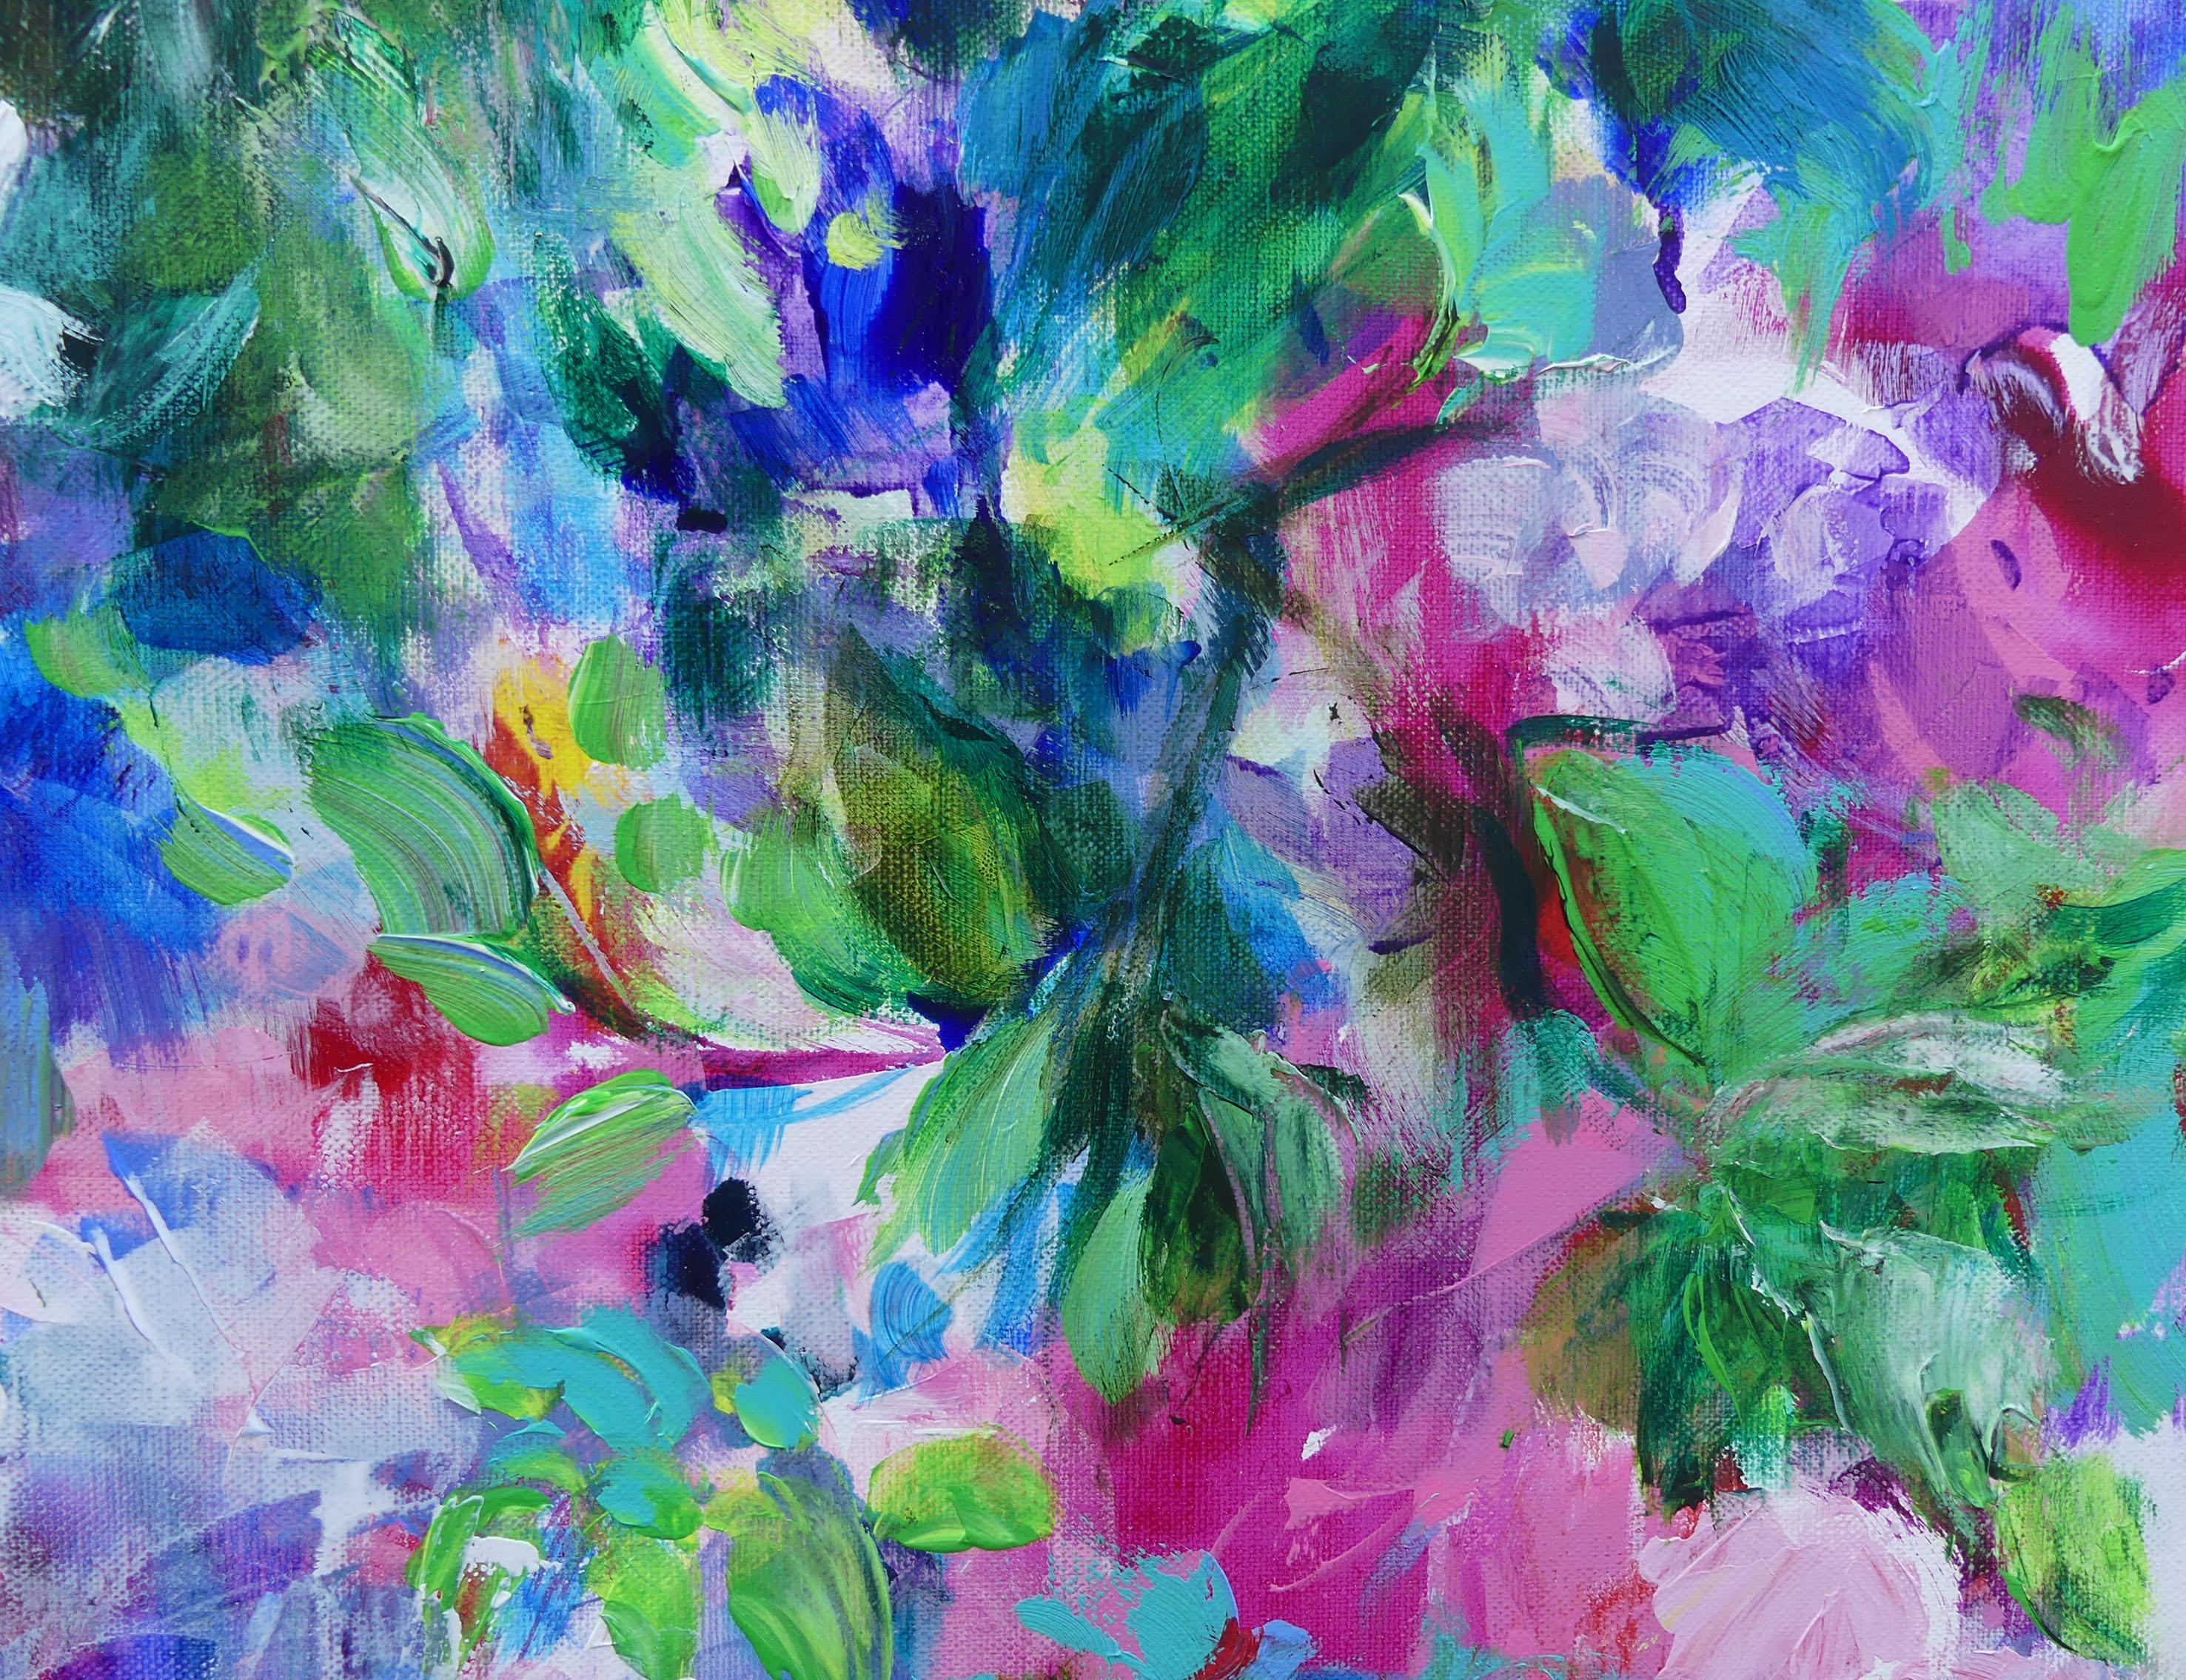 ‘The season of happiness from Mary Chaplin’ When a climbing old rose meets a clematis and form together a cascade that moves with the wind and brings a new source of inspiration to the artist! This painting is the expression of a moment caught on